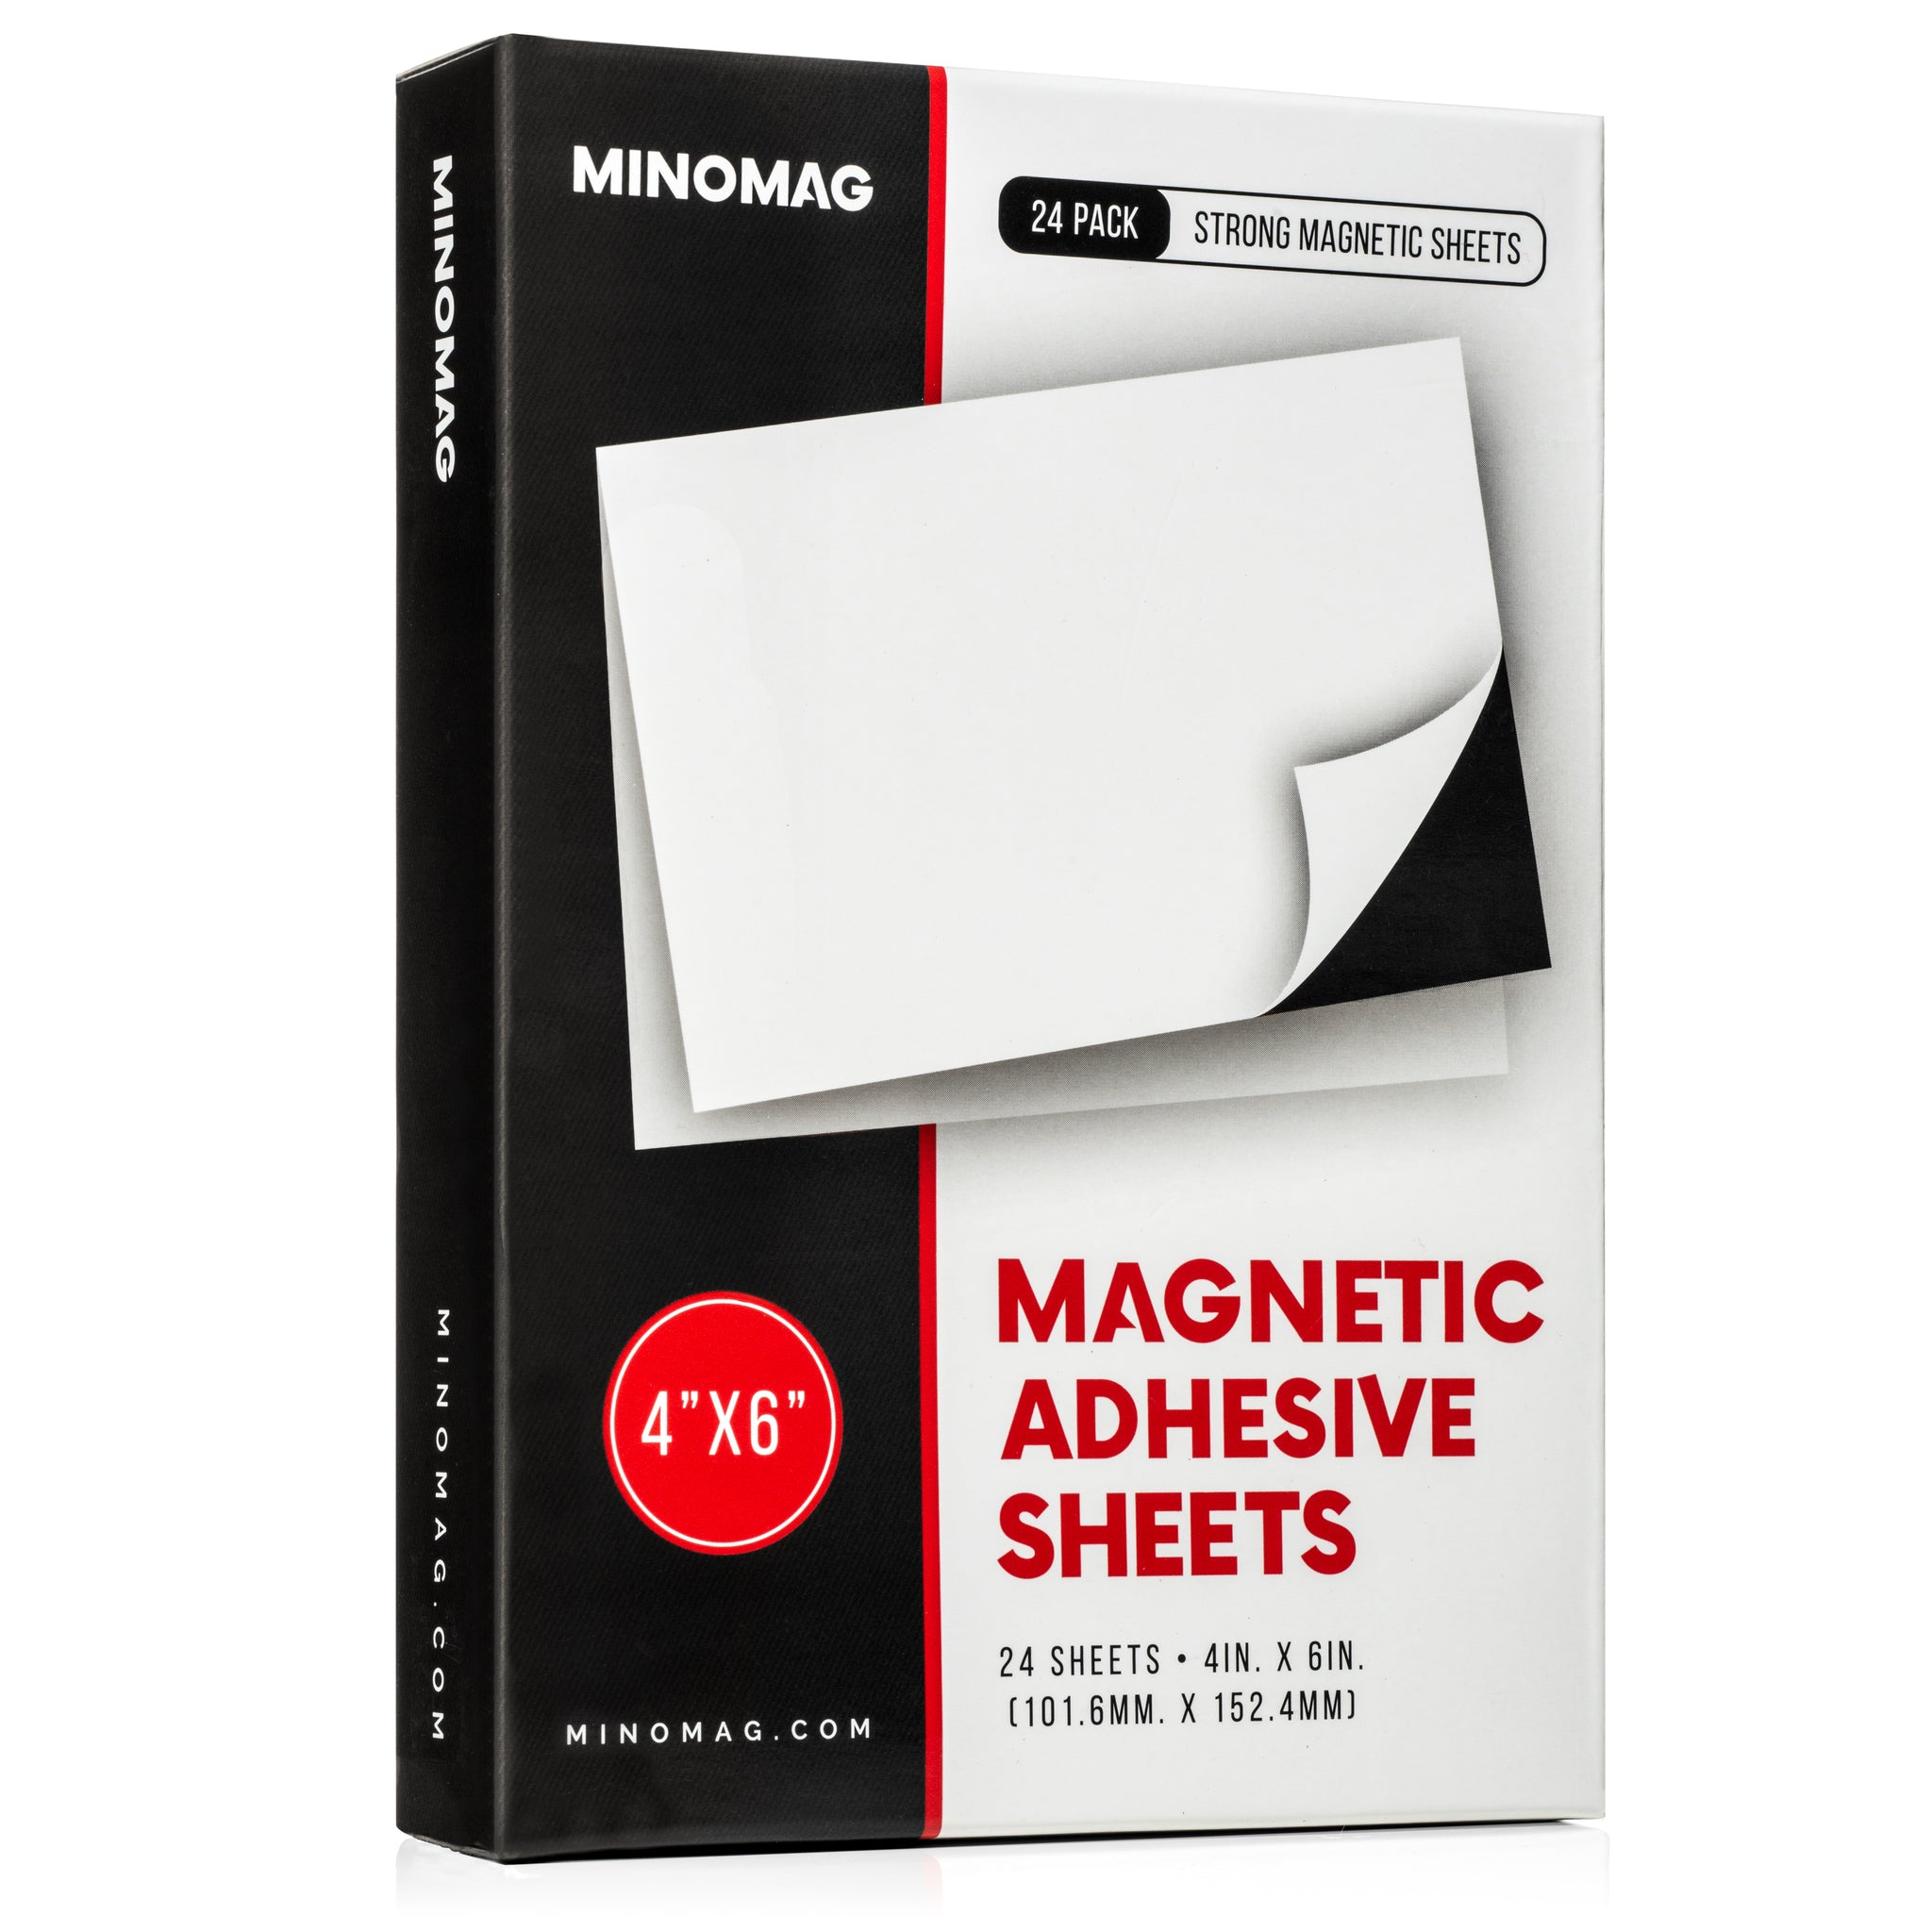 MagX Self Adhesive Magnetic Sheets 4x6 (4x6) (10 Sheets), Magnetic Sheets with Adhesive Backing, Photo Magnets, Peel and Stick, Stationery, Office